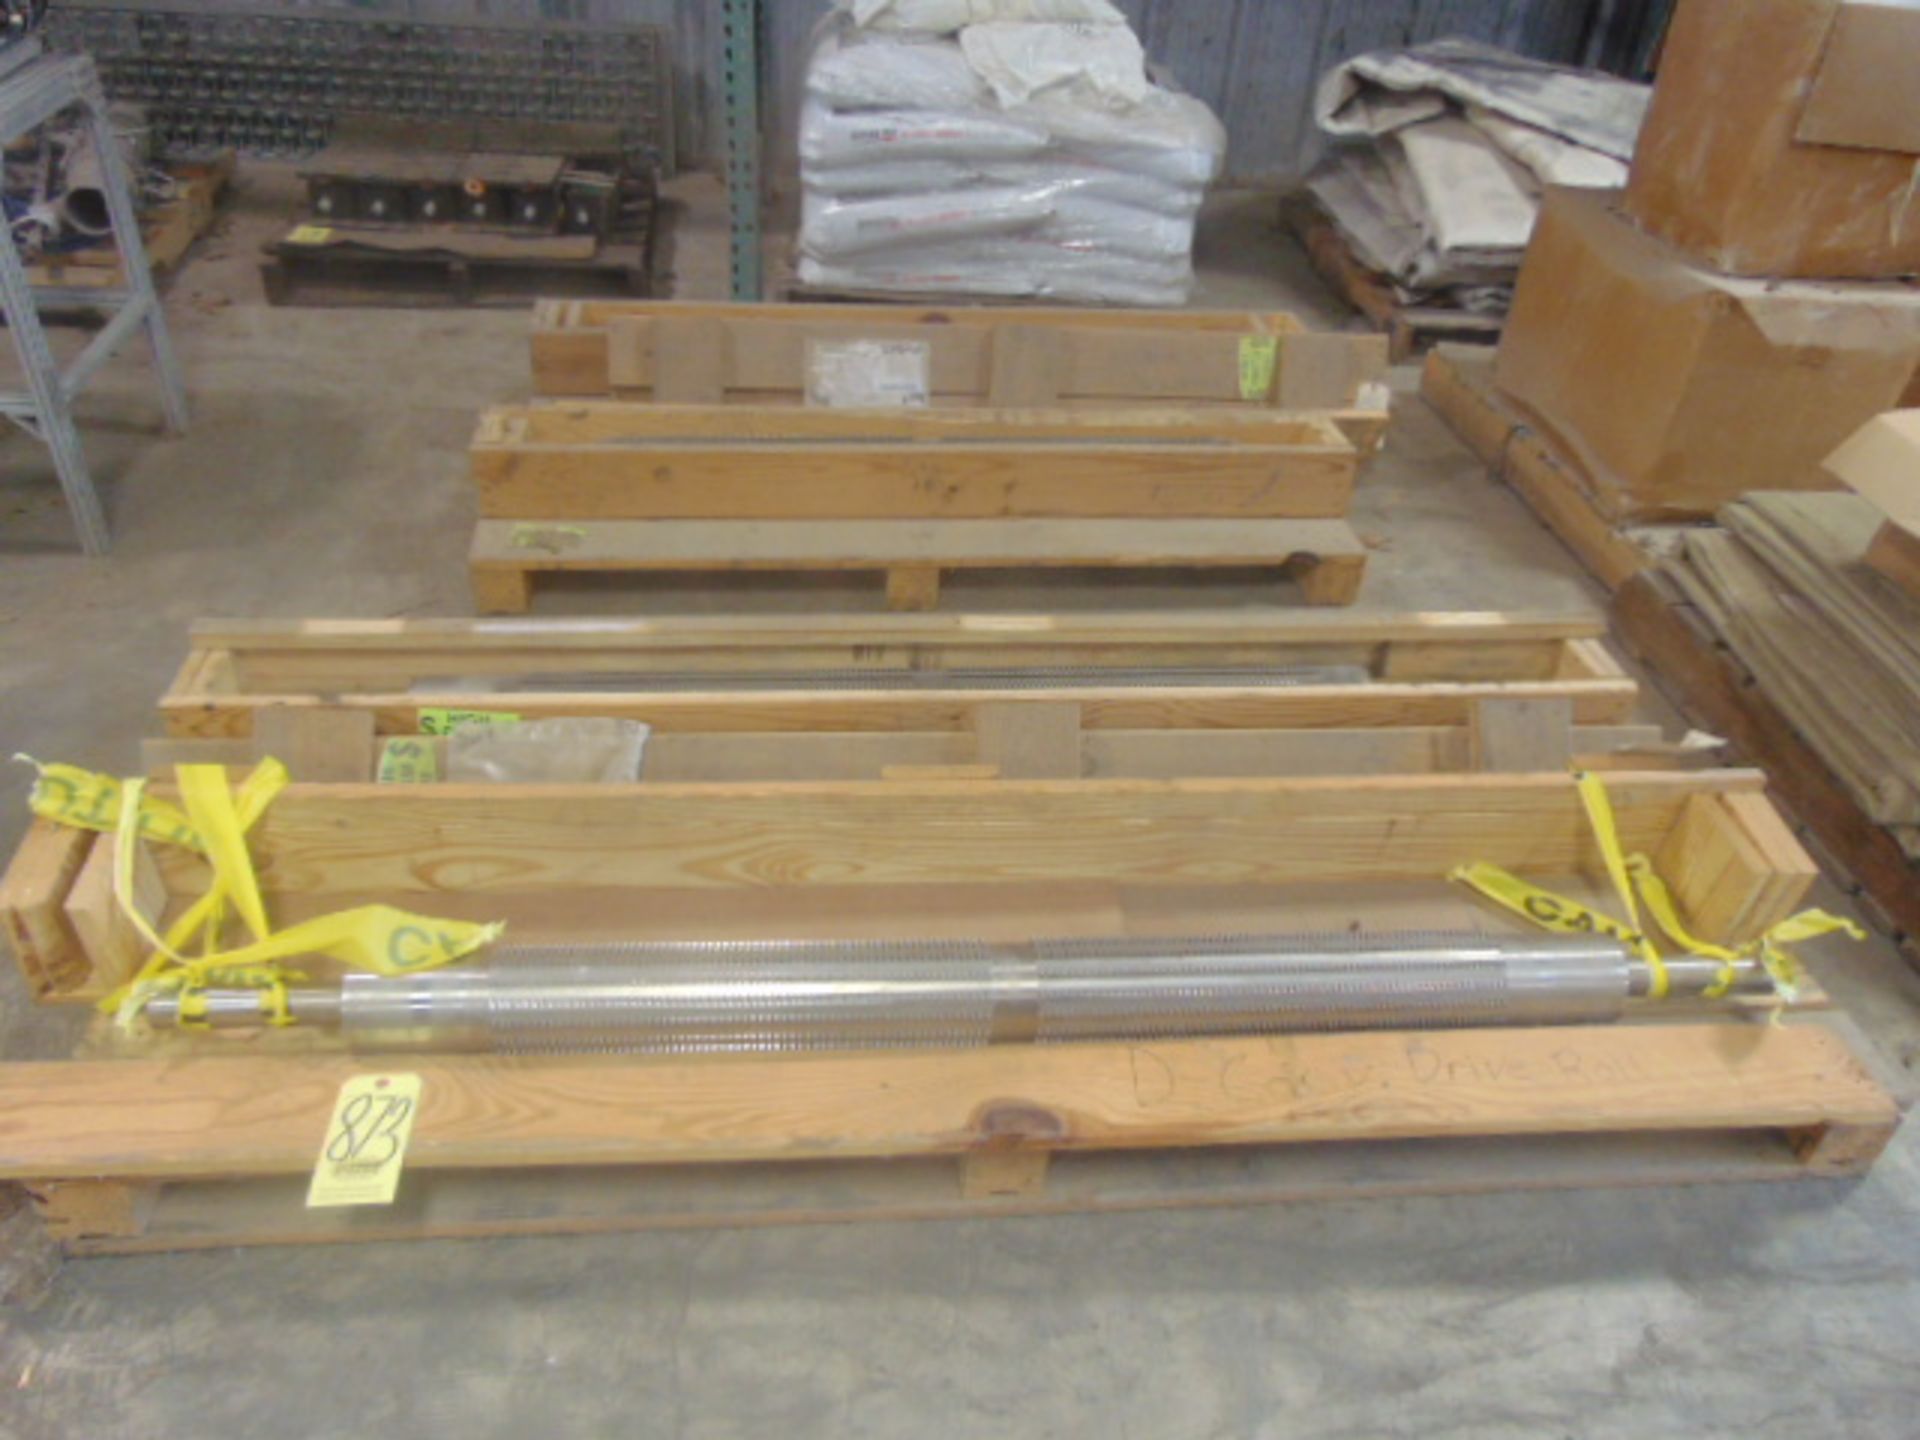 LOT OF CONVEYOR TAIL ROLLS (4), assorted (Located in bldg. 8)